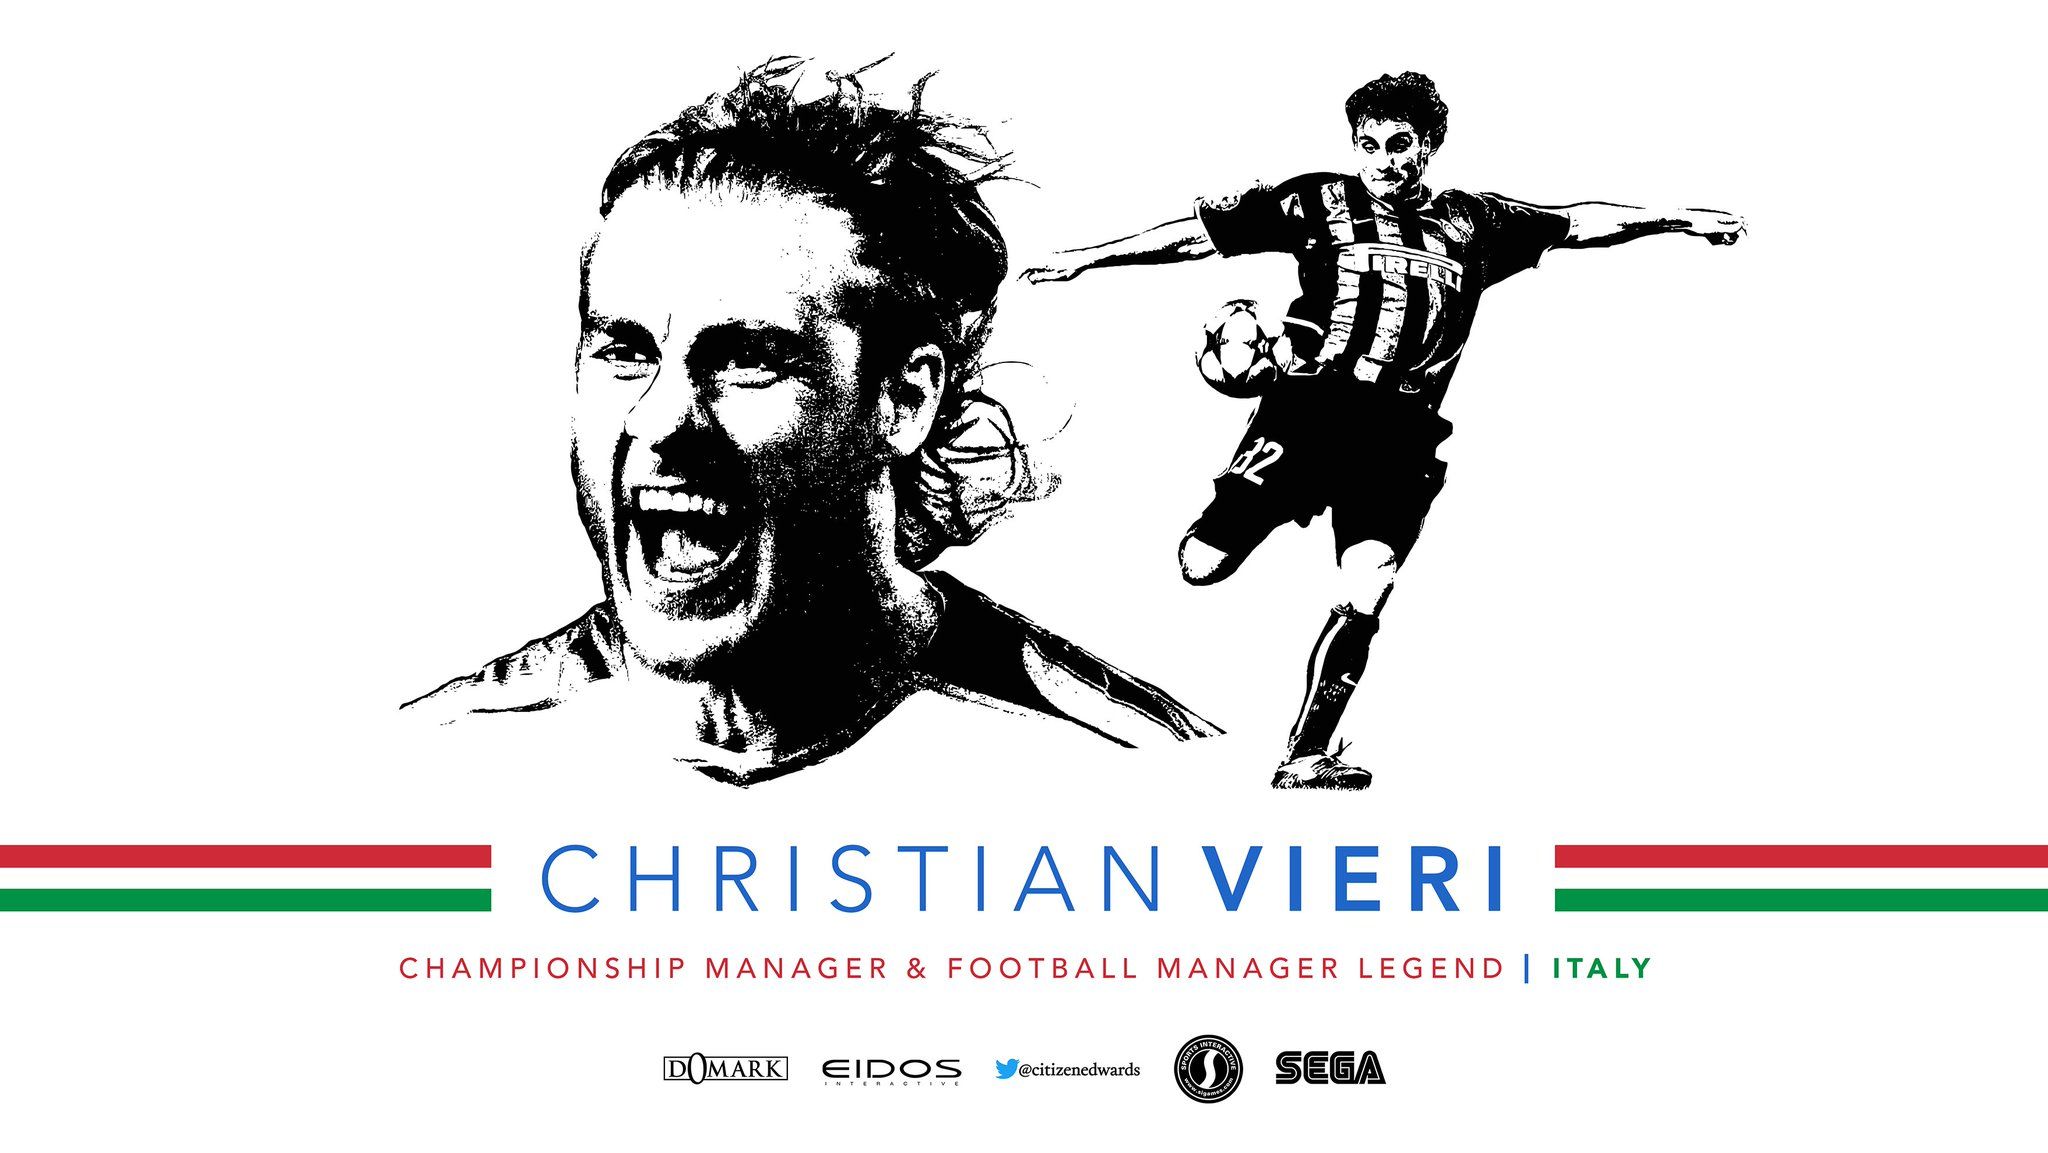 Ian Edwards goals, what a career! #Torino #Juventus #Atletico #Lazio #InterMilan #ACMilan #Italy & more! CHRISTIAN VIERI is #legend 4⃣2⃣ in Championship Manager / Football Manager #Legends wallpaper series 2. #Free to